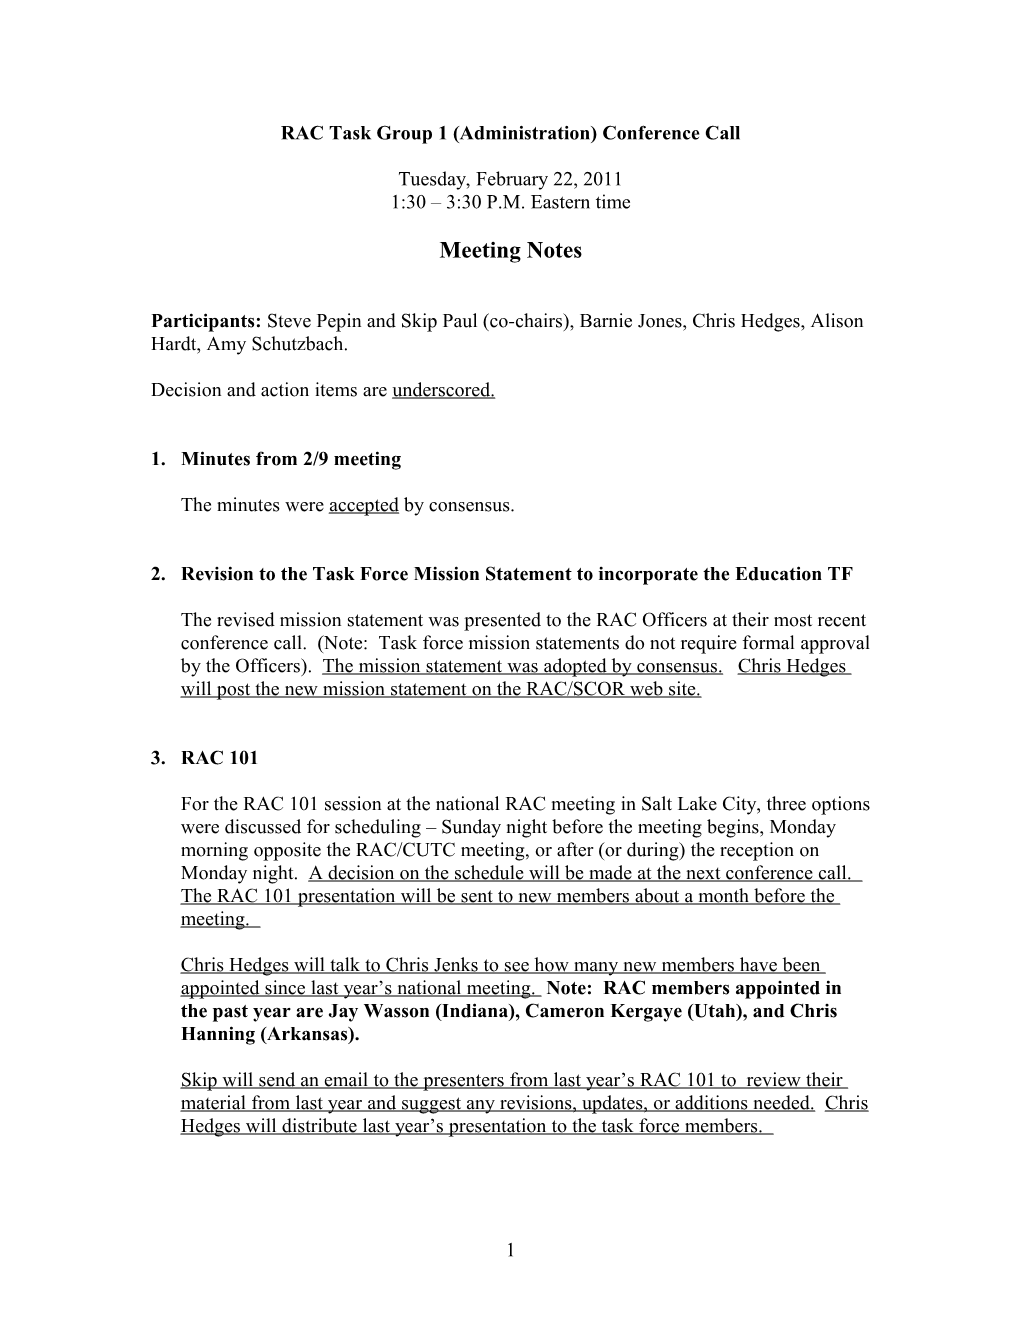 Administration TF Meeting Notes: February 22, 2011